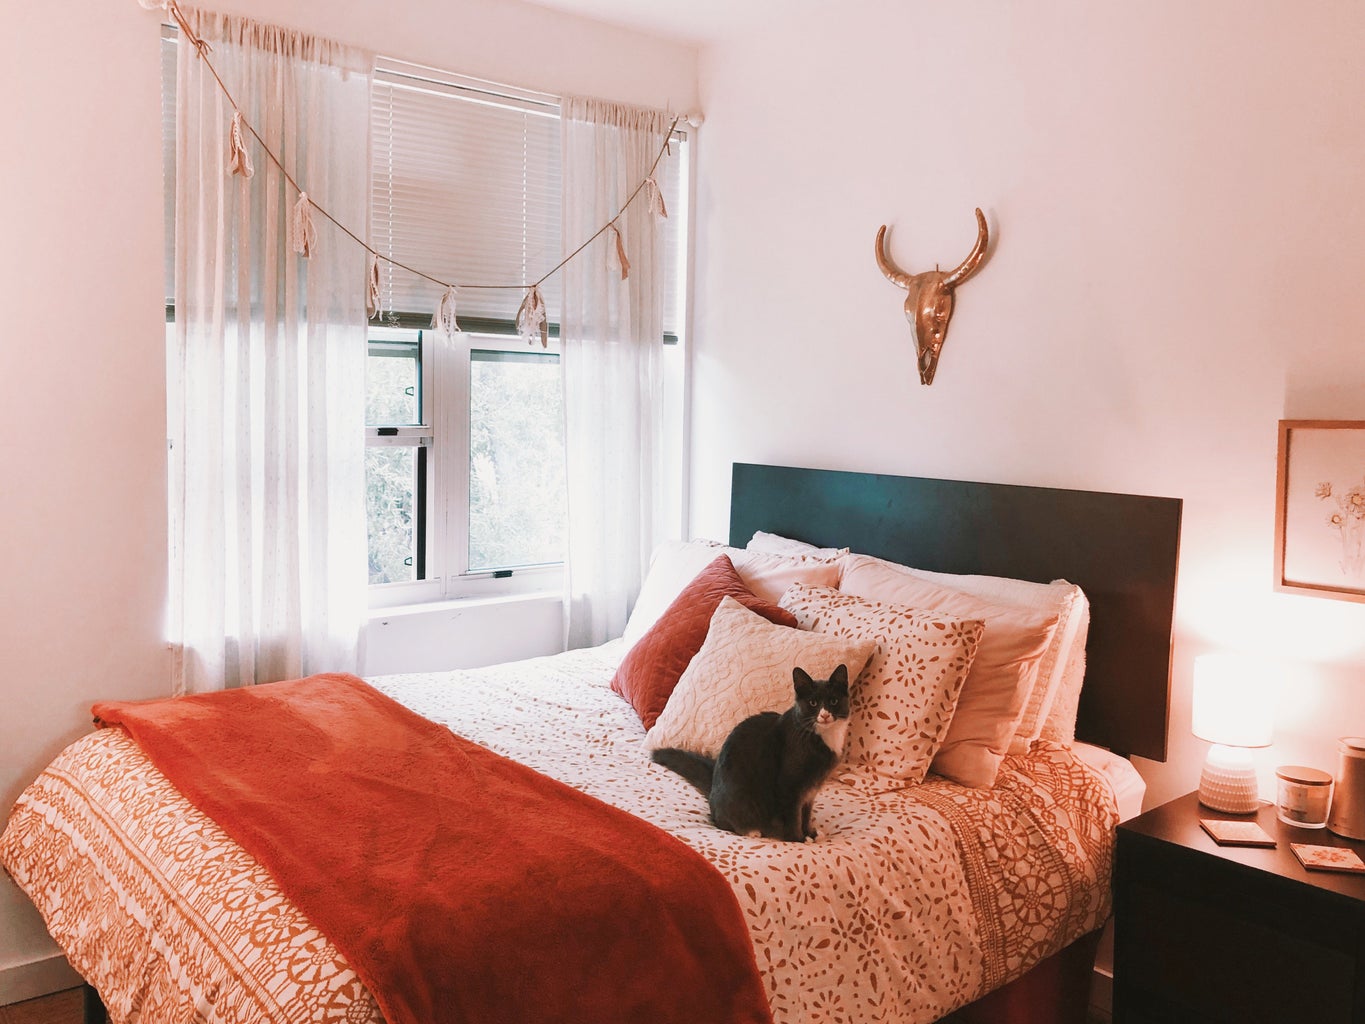 A bed that is decorated with burnt orange tones next to a window with sheer curtains